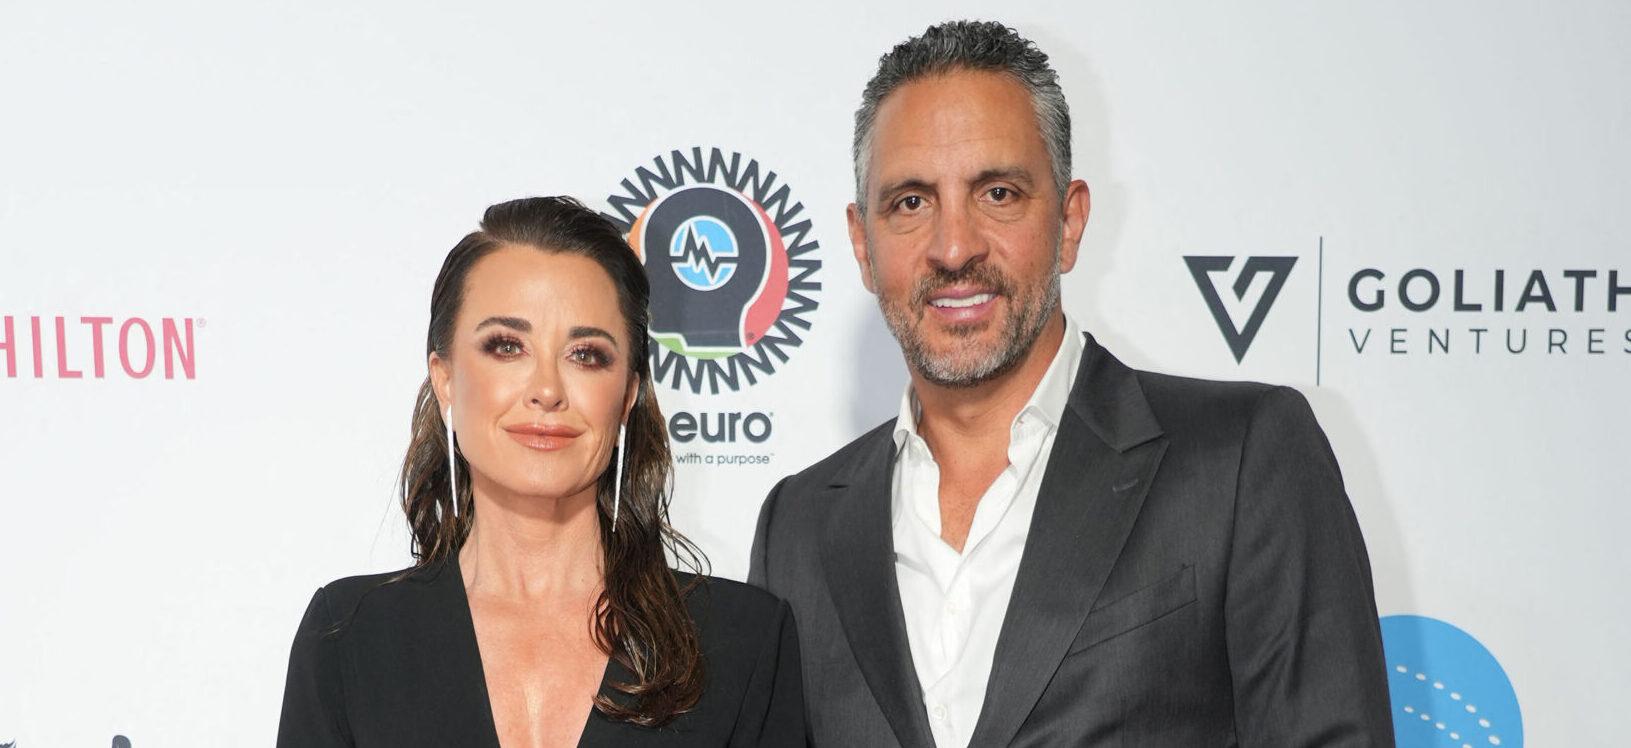 Kyle Richards Tosses Husband’s Last Name Amid Change In Their Living Situation